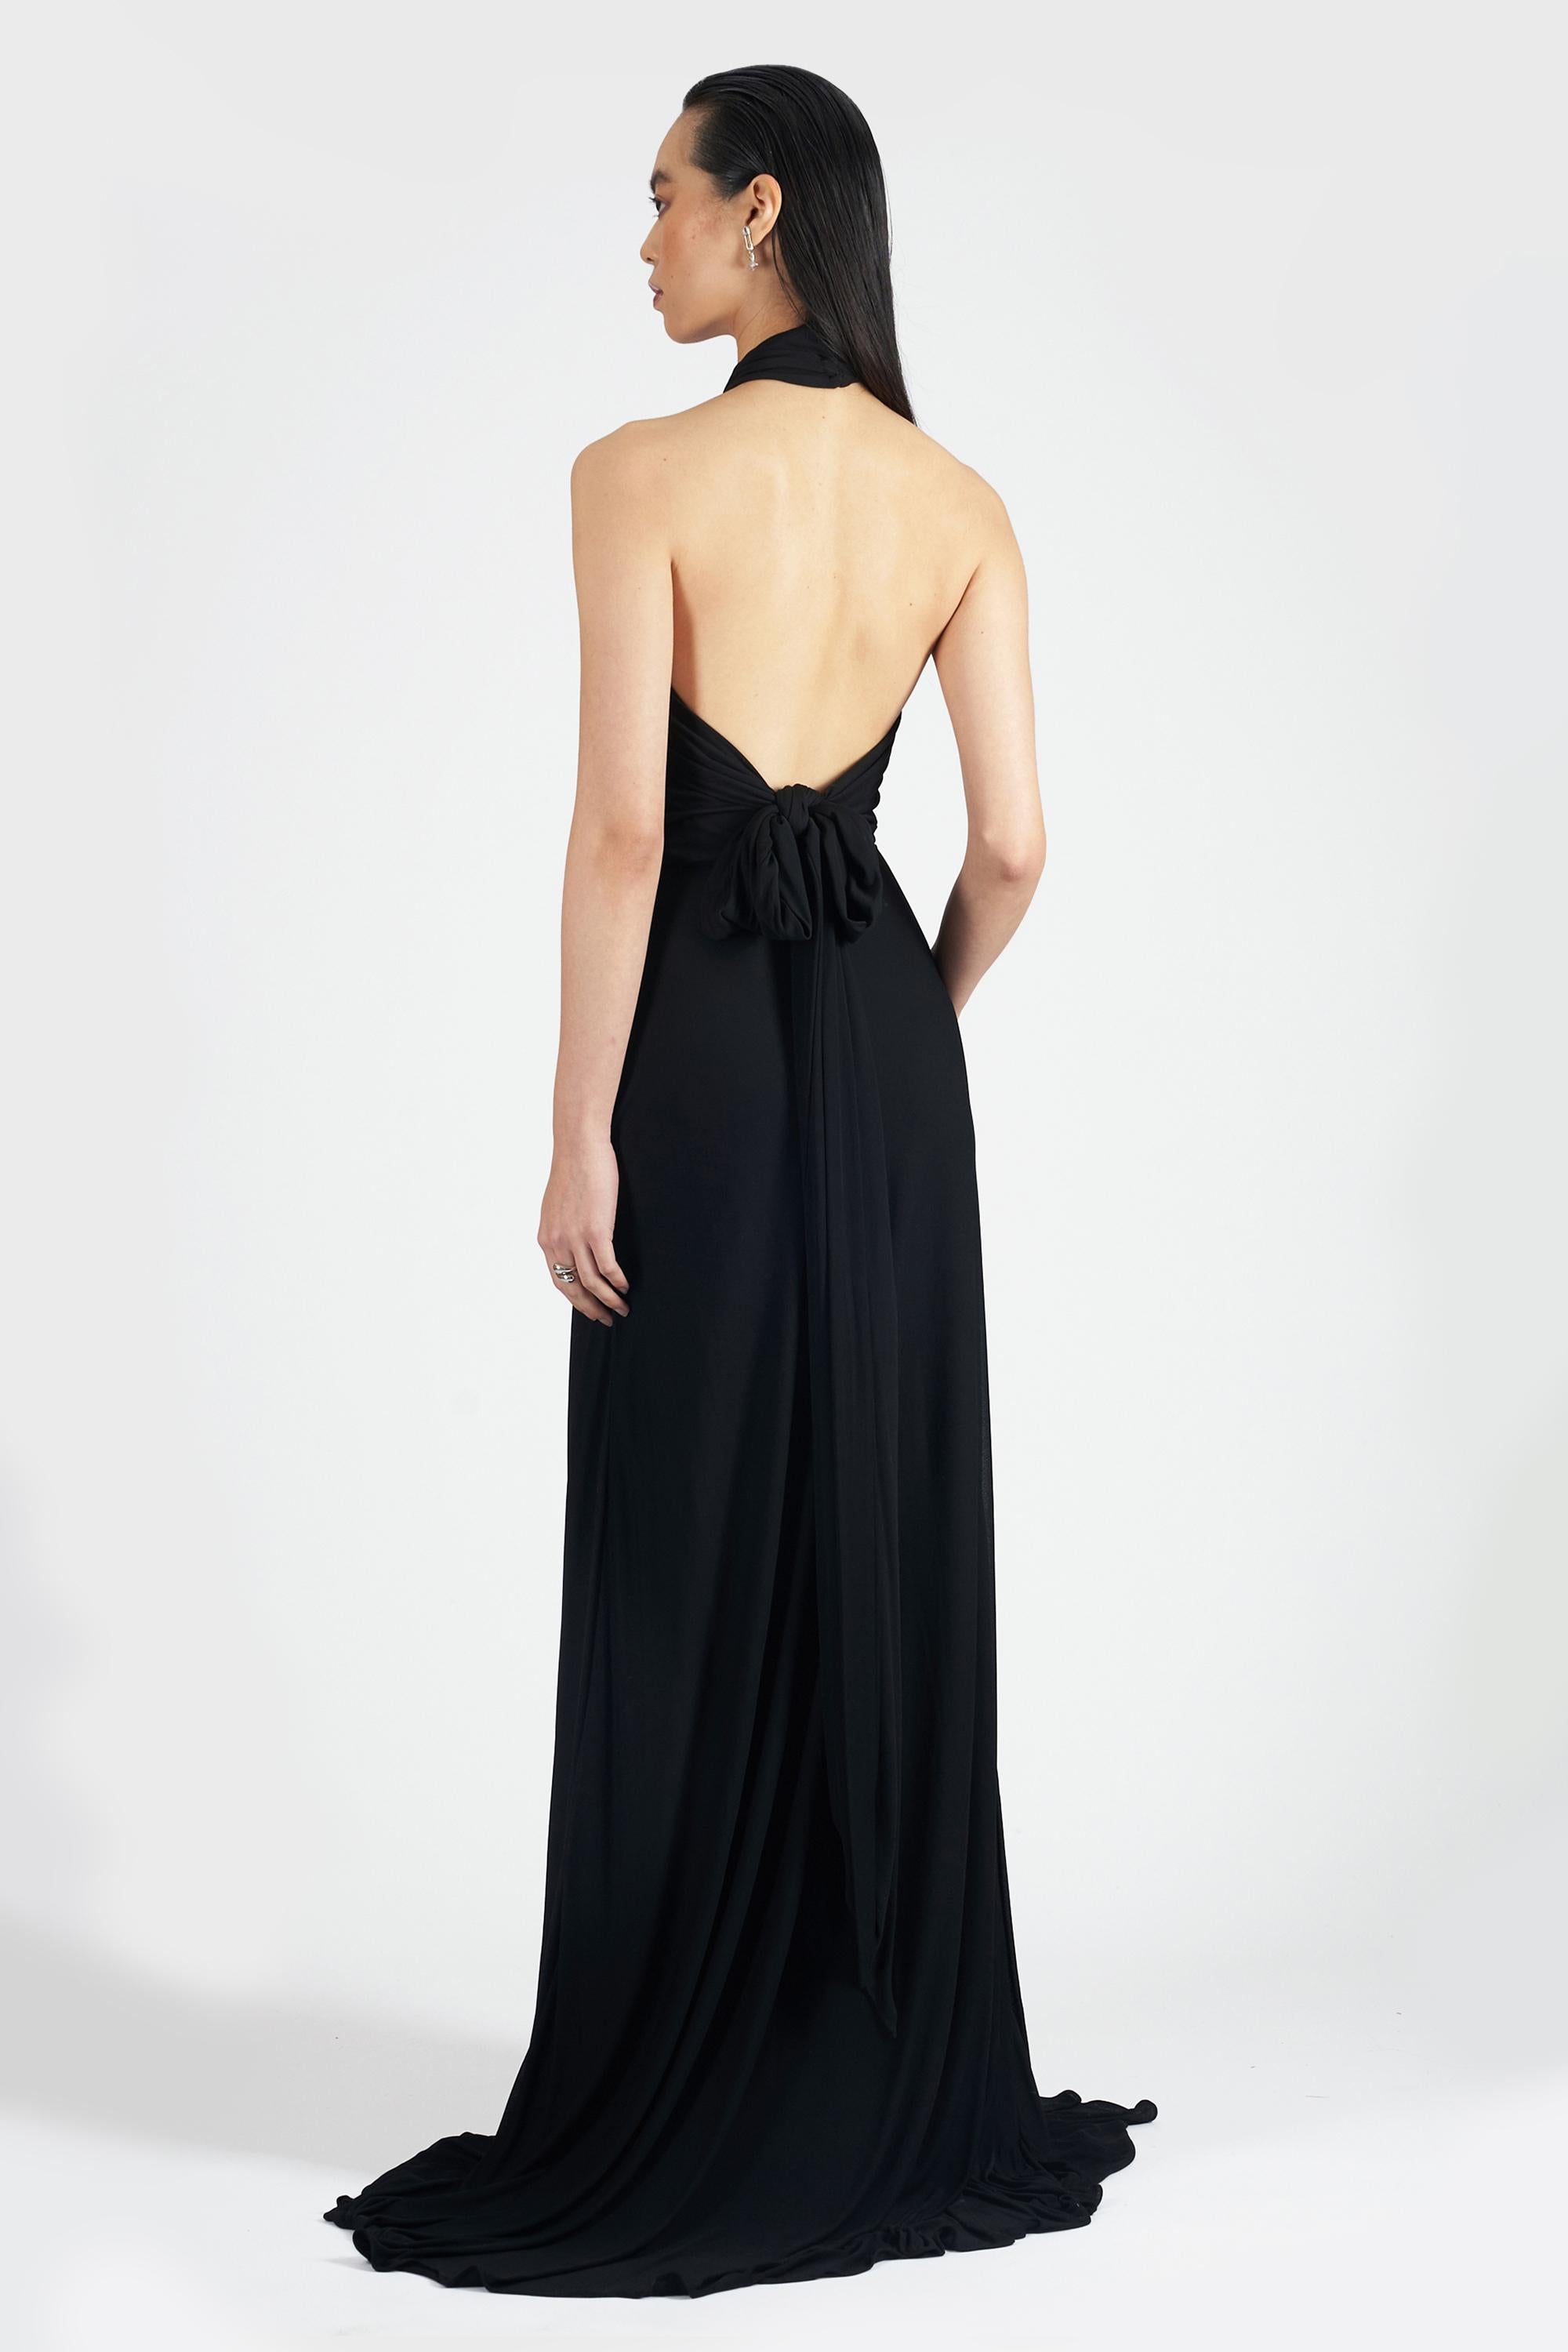 We are excited to present this Alexander McQueen black maxi dress with halter neckline. Features tie back detail and maxi length. In excellent vintage condition.
Authenticity guaranteed.

Label size: EU 38
Modern size: UK: 8 to 10, US: 4 to 6, EU 38